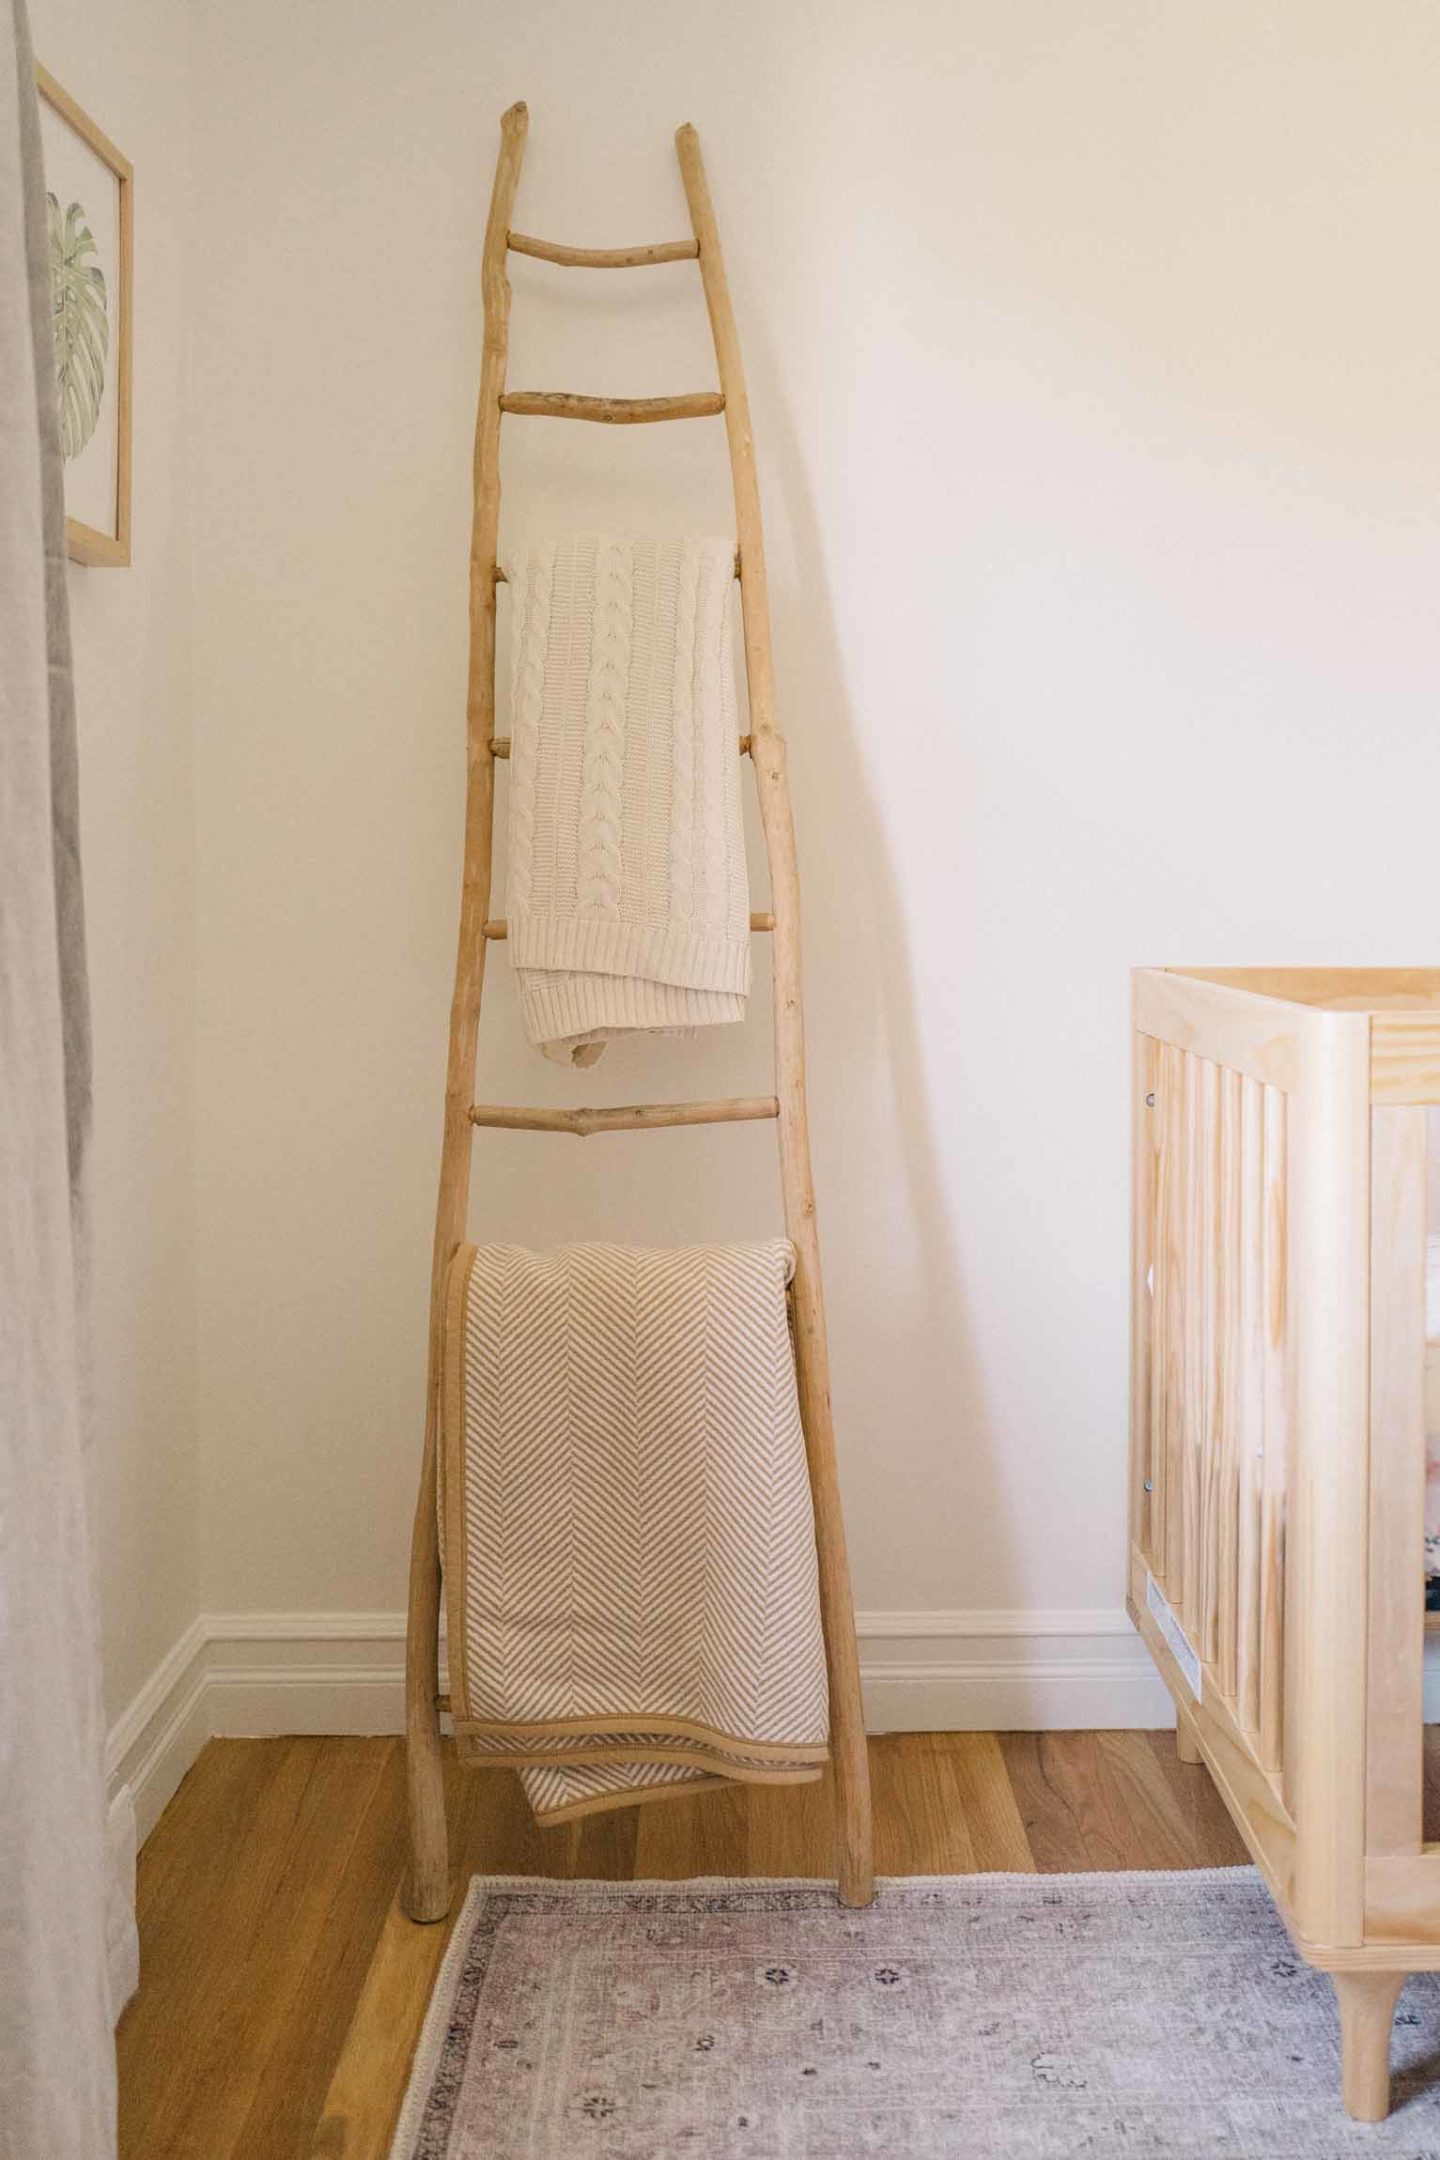 Jess Ann Kirby uses a wood latter to hang baby blankets in her gender neutral nursery.